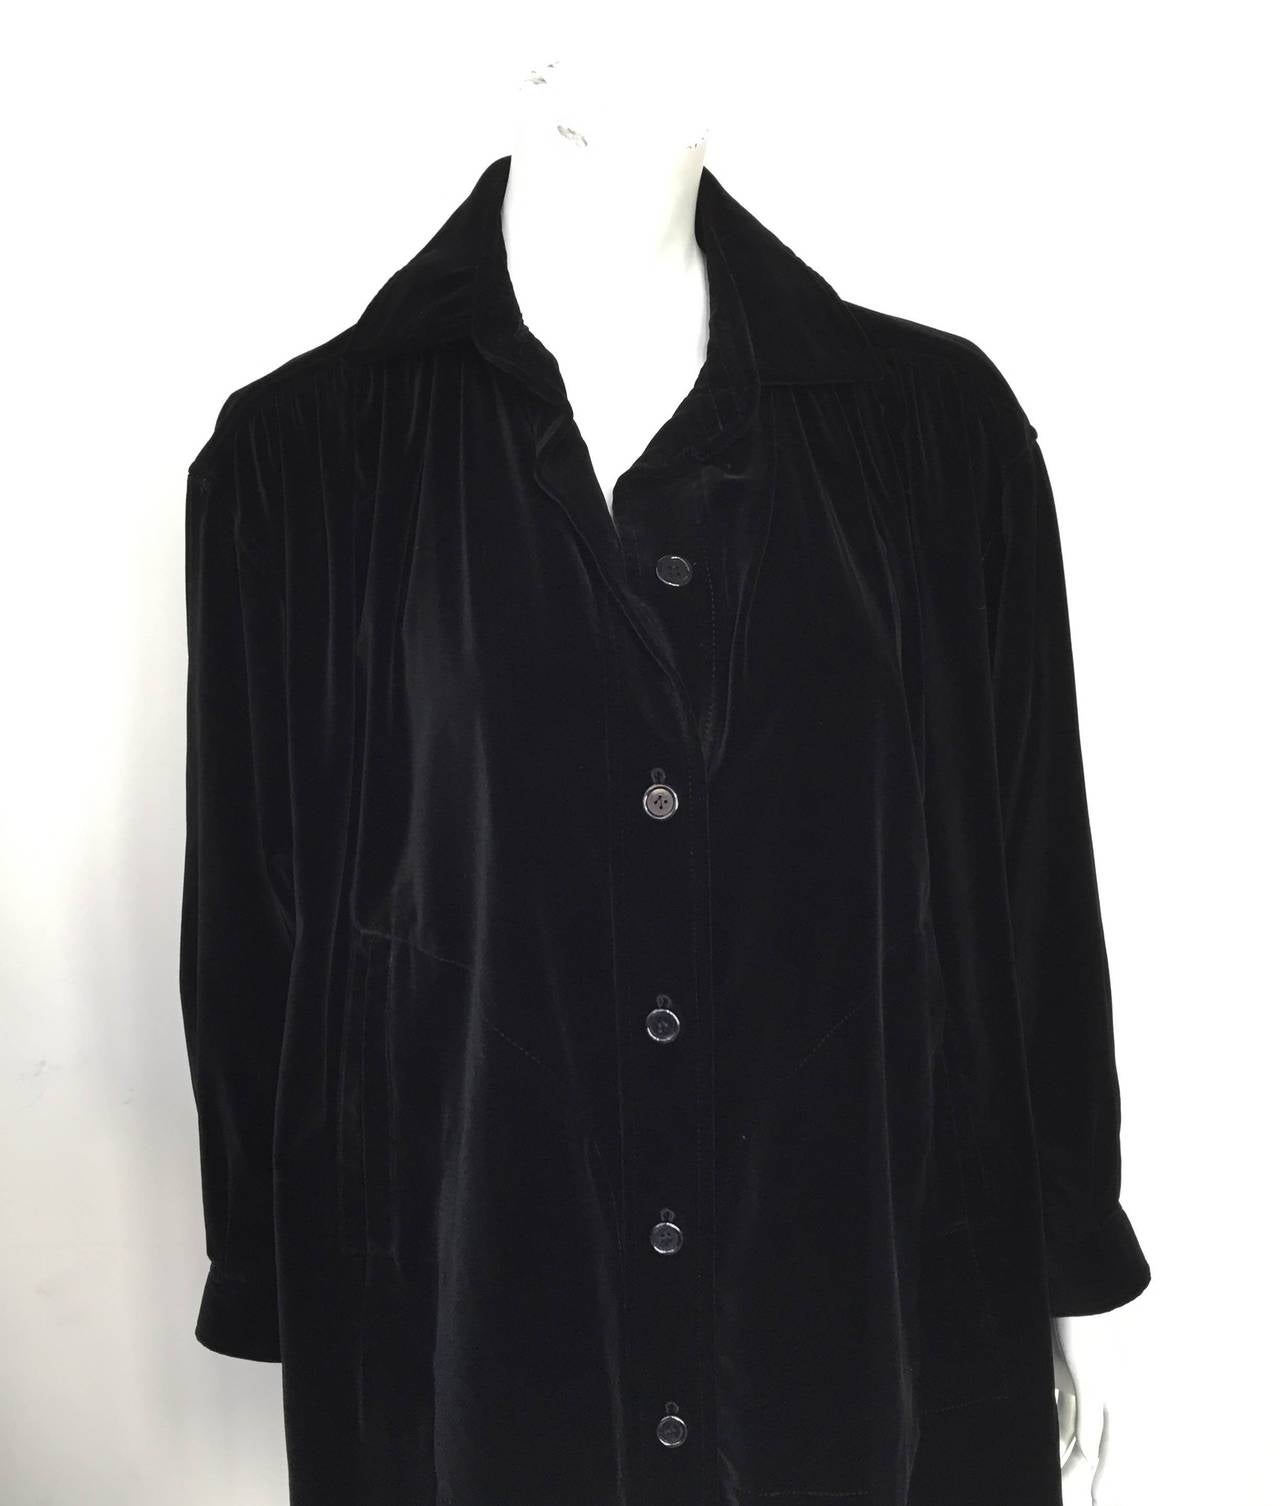 Saint Laurent Rive Gauche 70s black velvet oversized peasant coat. This gorgeous and statement coat could actually be worn as a dress. There are 6 buttons on front and slant front pockets. Made in France and size 42 on label and fits like an US size